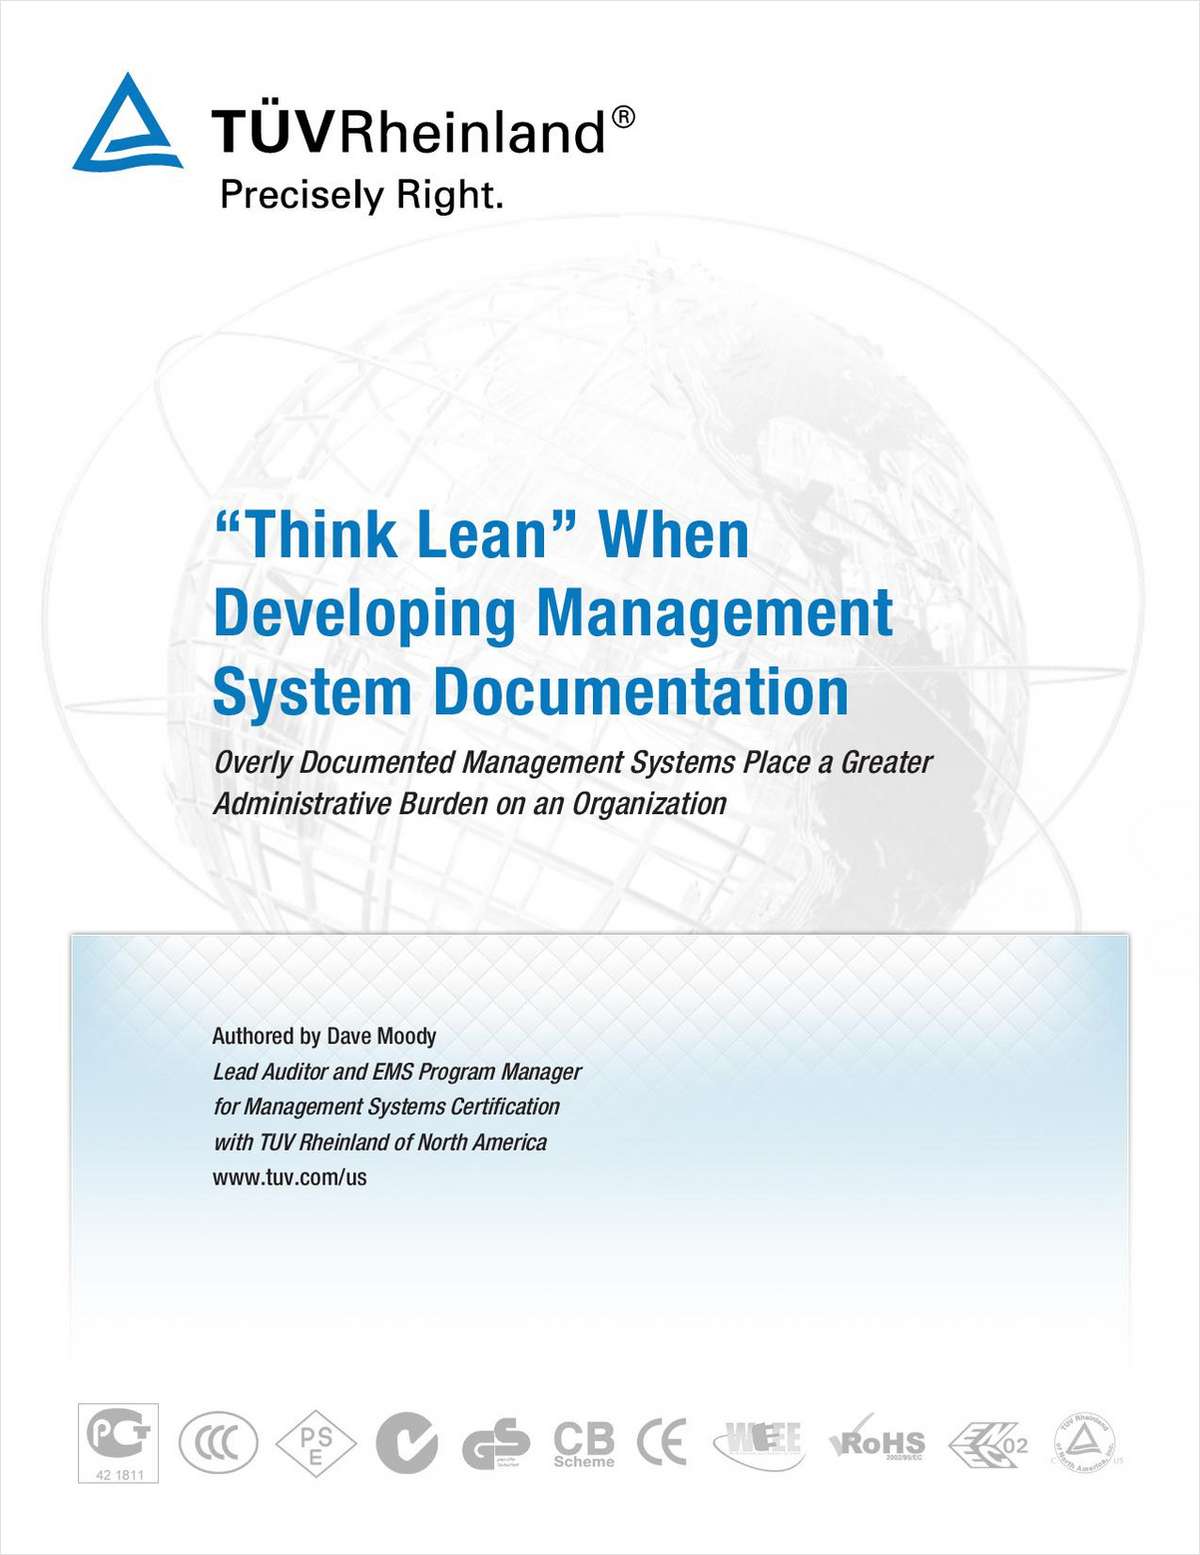 'Think Lean' When Developing Management System Documentation